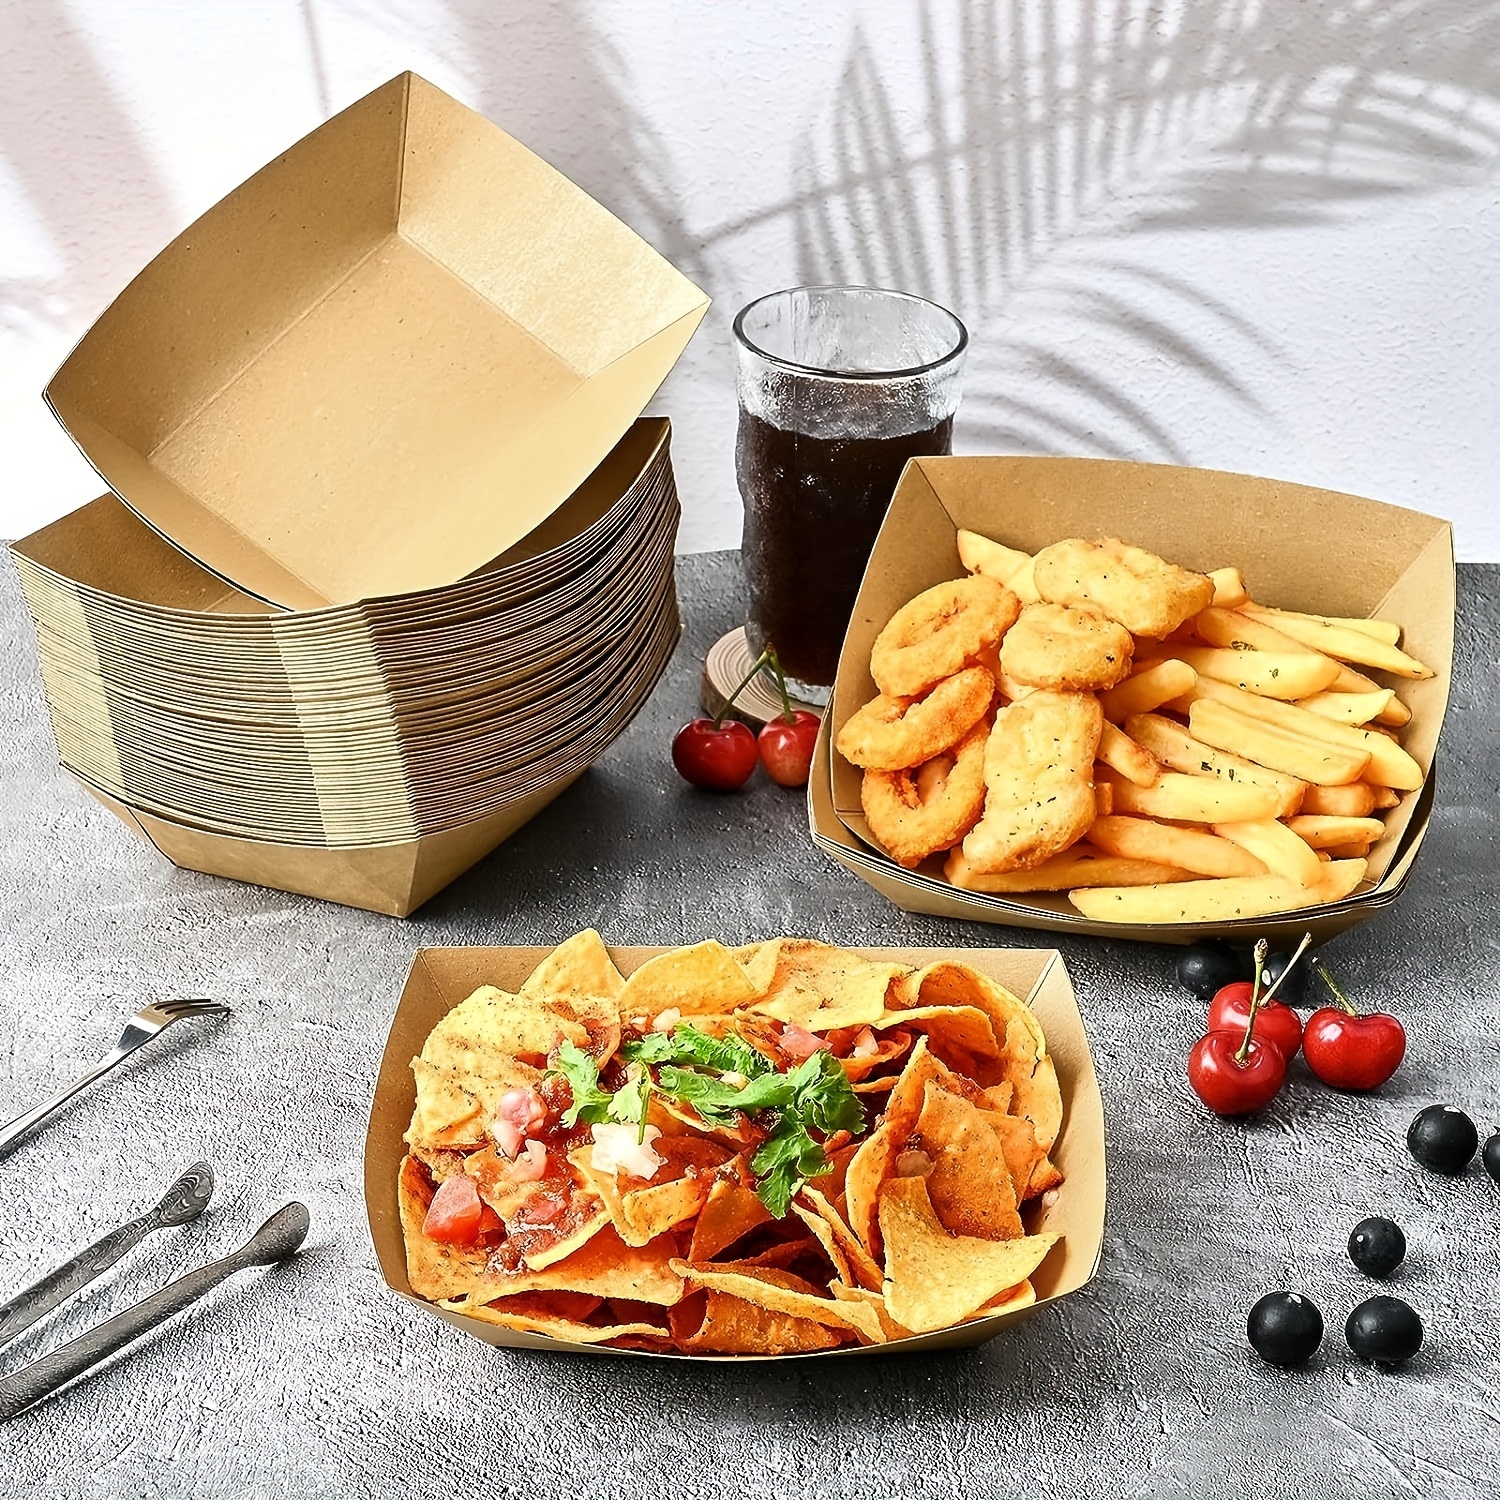 Stock Your Home [250 Pack] Extra Large Disposable Brown Kraft Paper Food  Trays, 3-Lb Concession Tray, Serving Boats for Party Snacks, Taco Bar